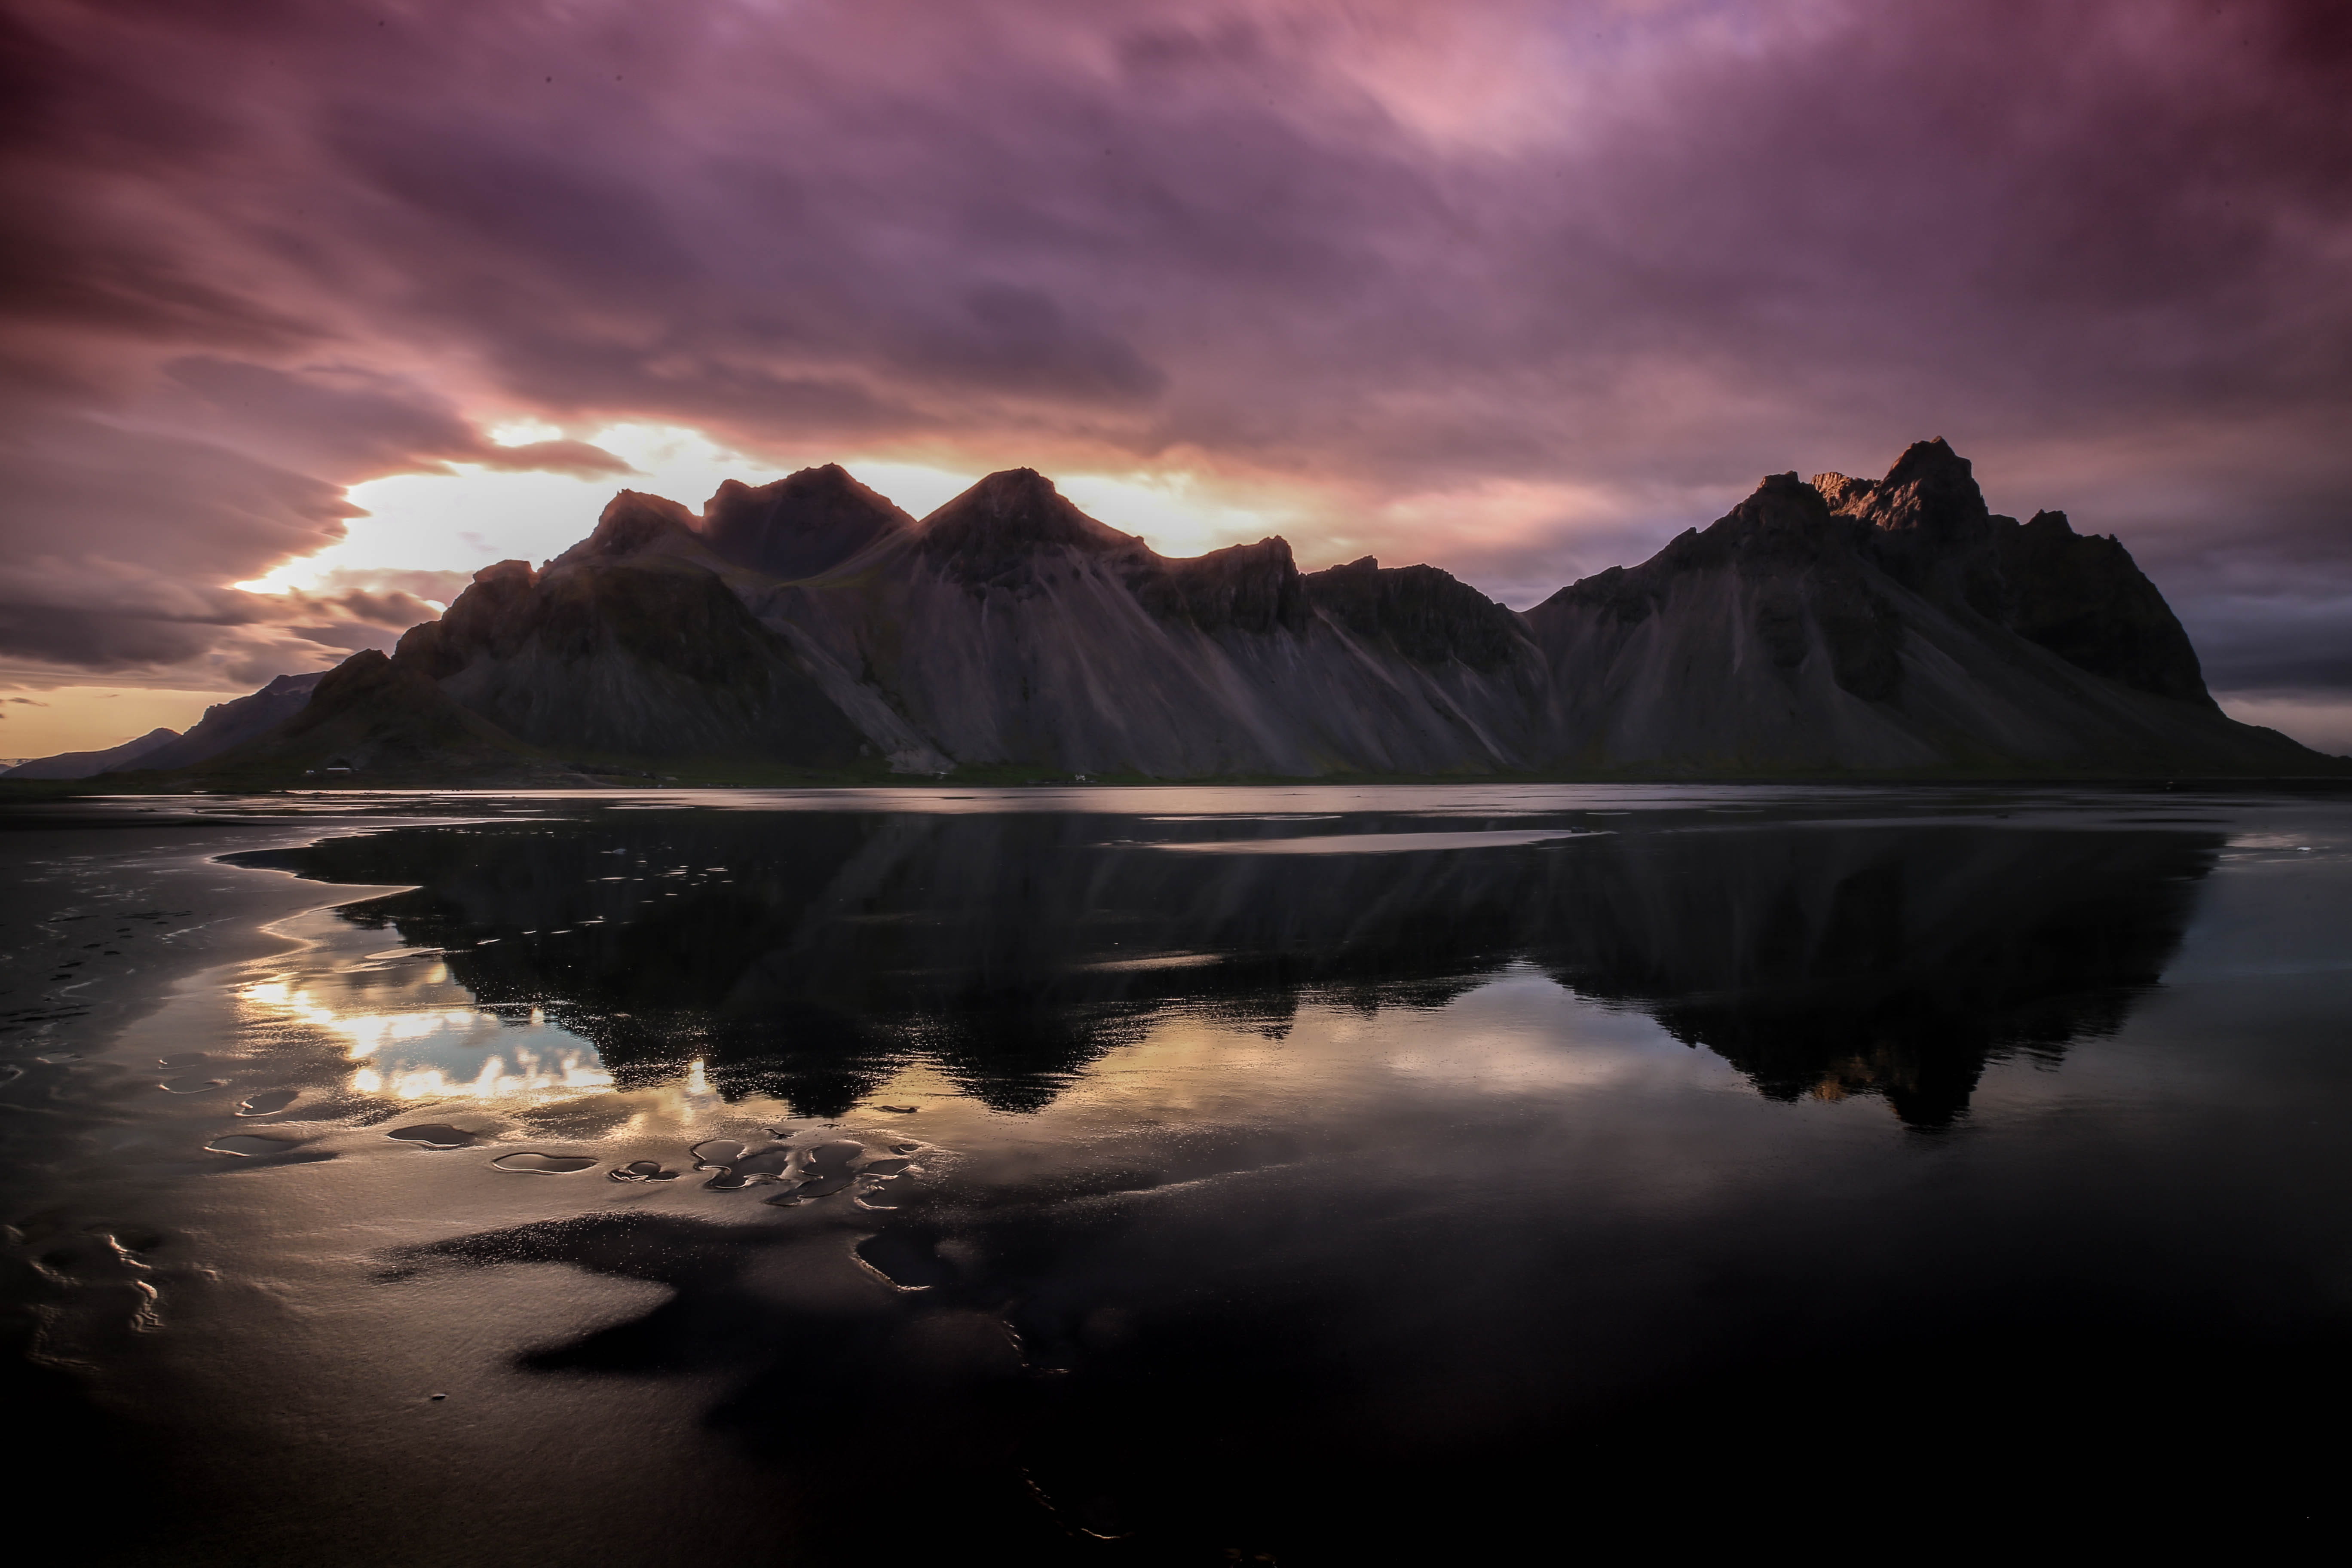 mountains reflecting on body of water, Black Sand Beach Summer Solstice Sunset Iceland